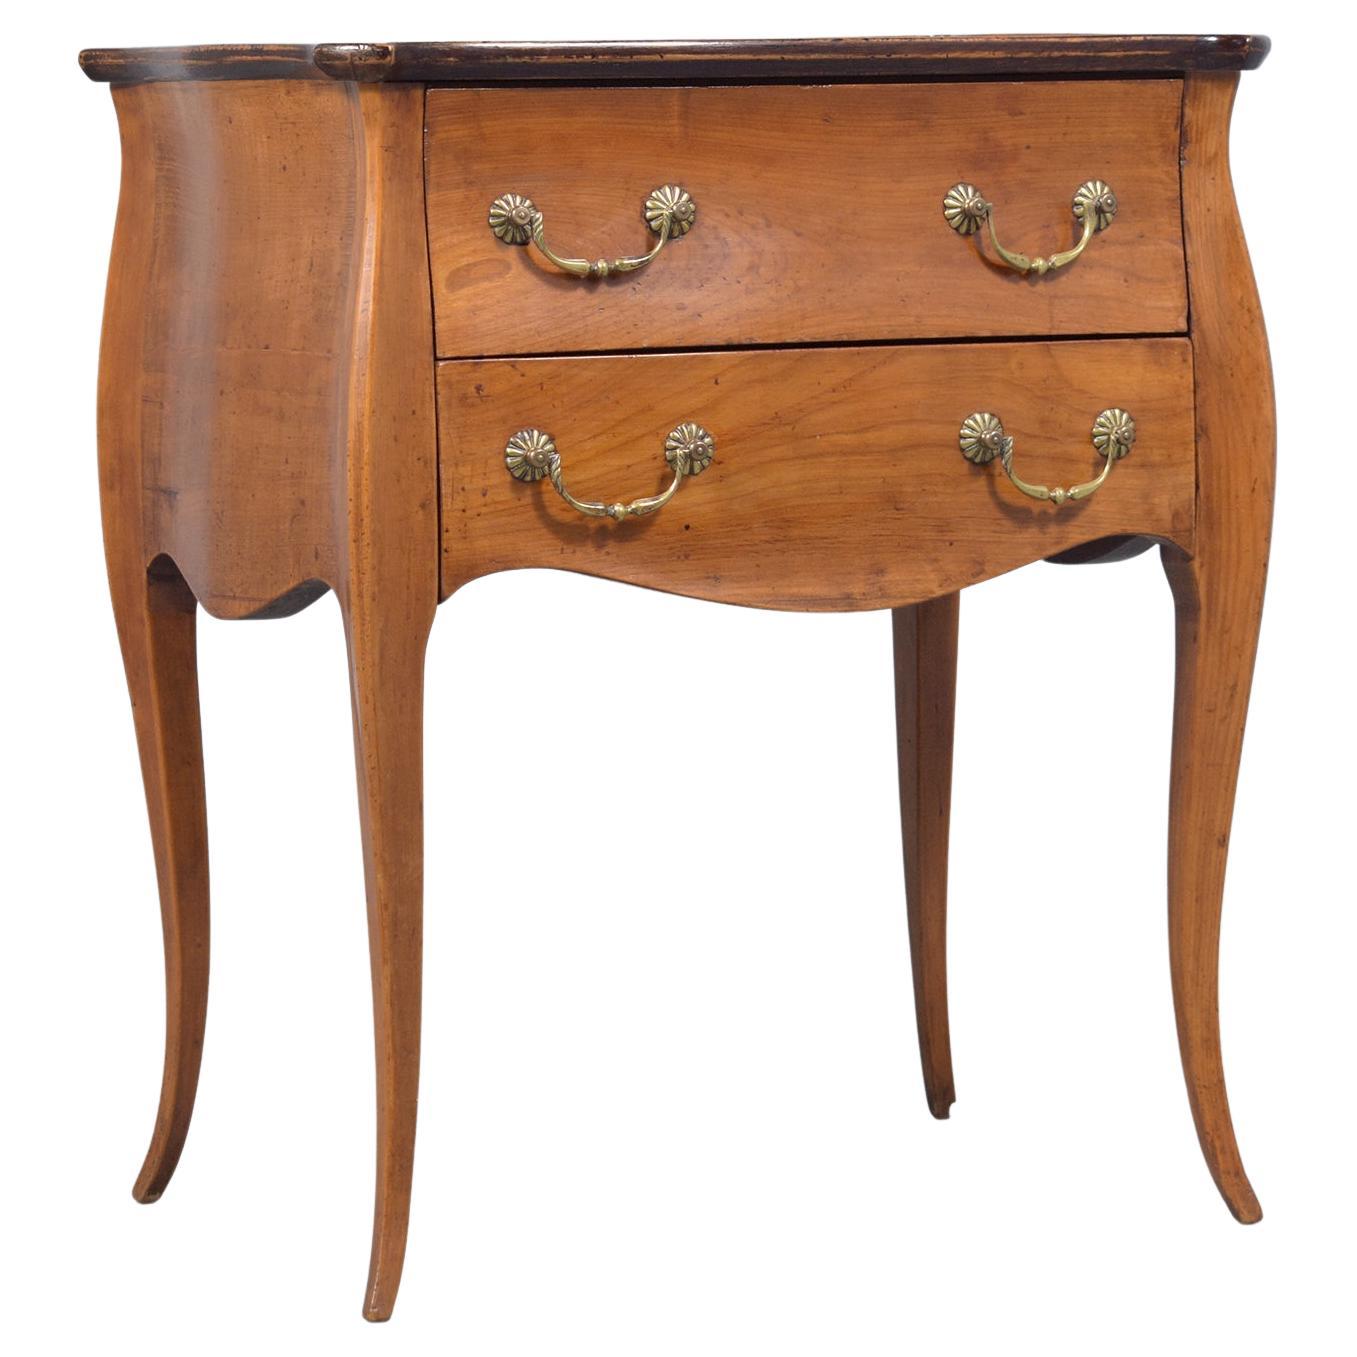 1880s Antique Provincial Light Walnut Commode with Inlaid Design For Sale